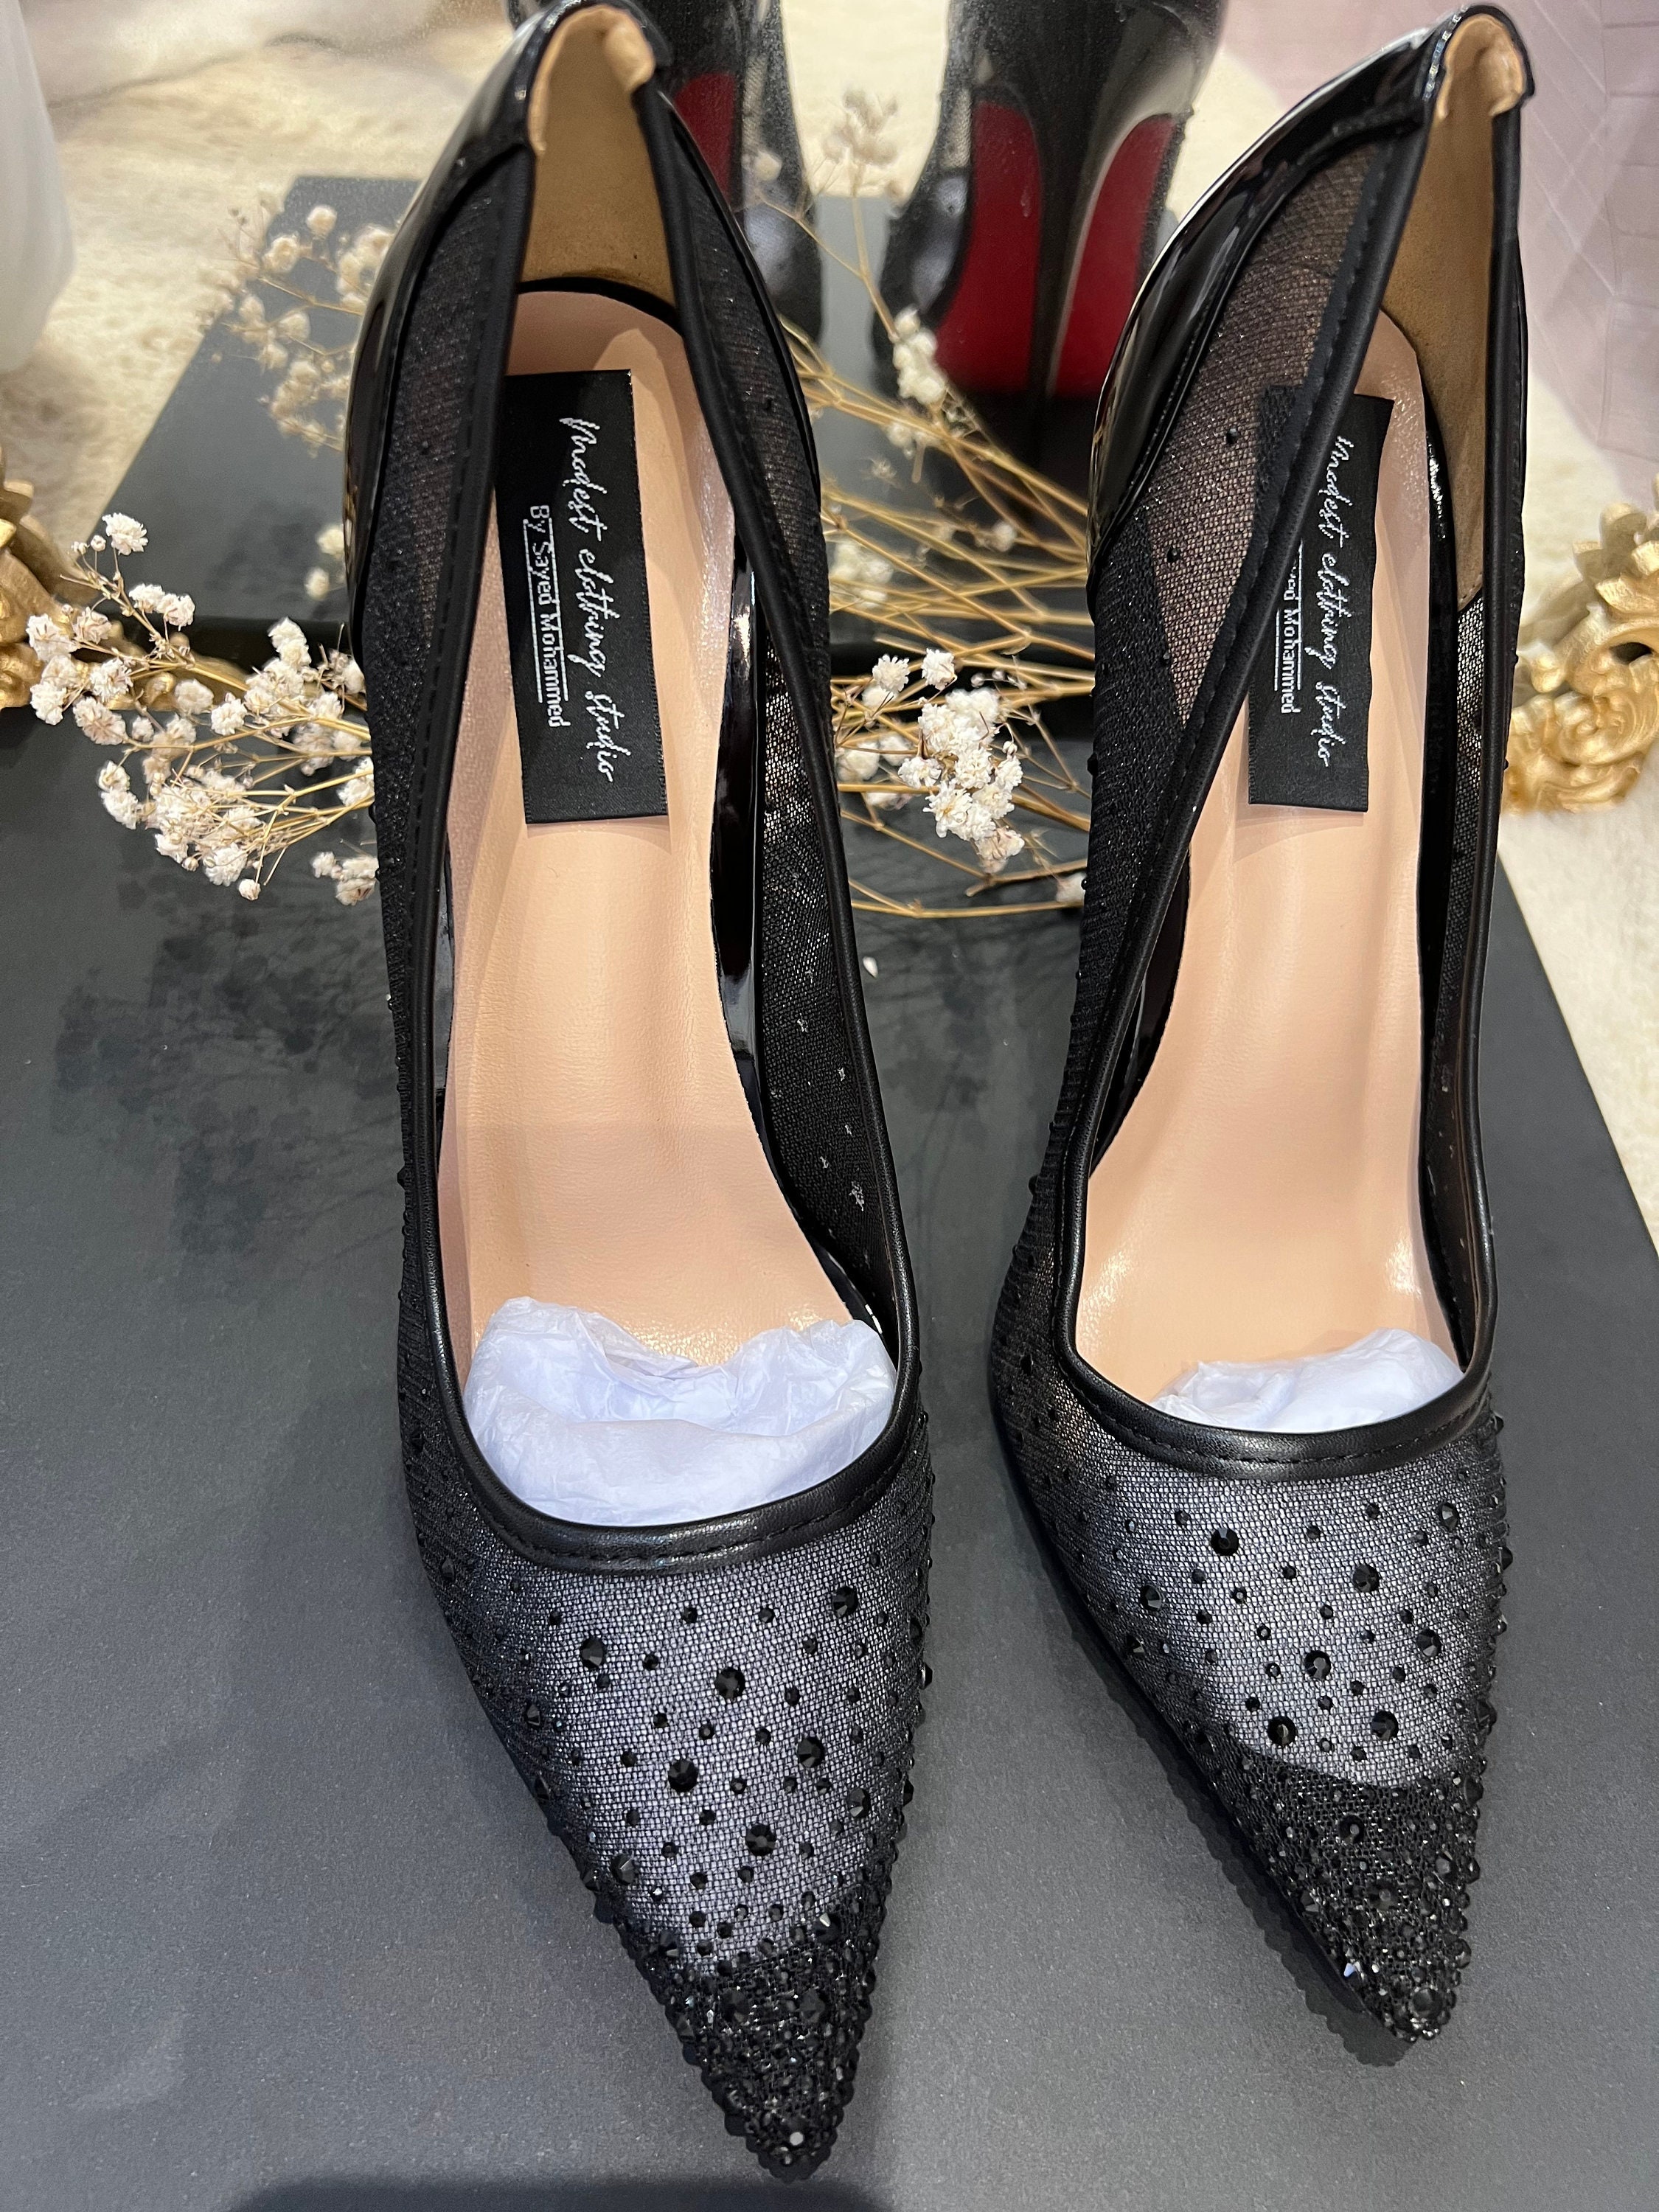 How do you guys find dior shoes on dhgate? : r/DHgate